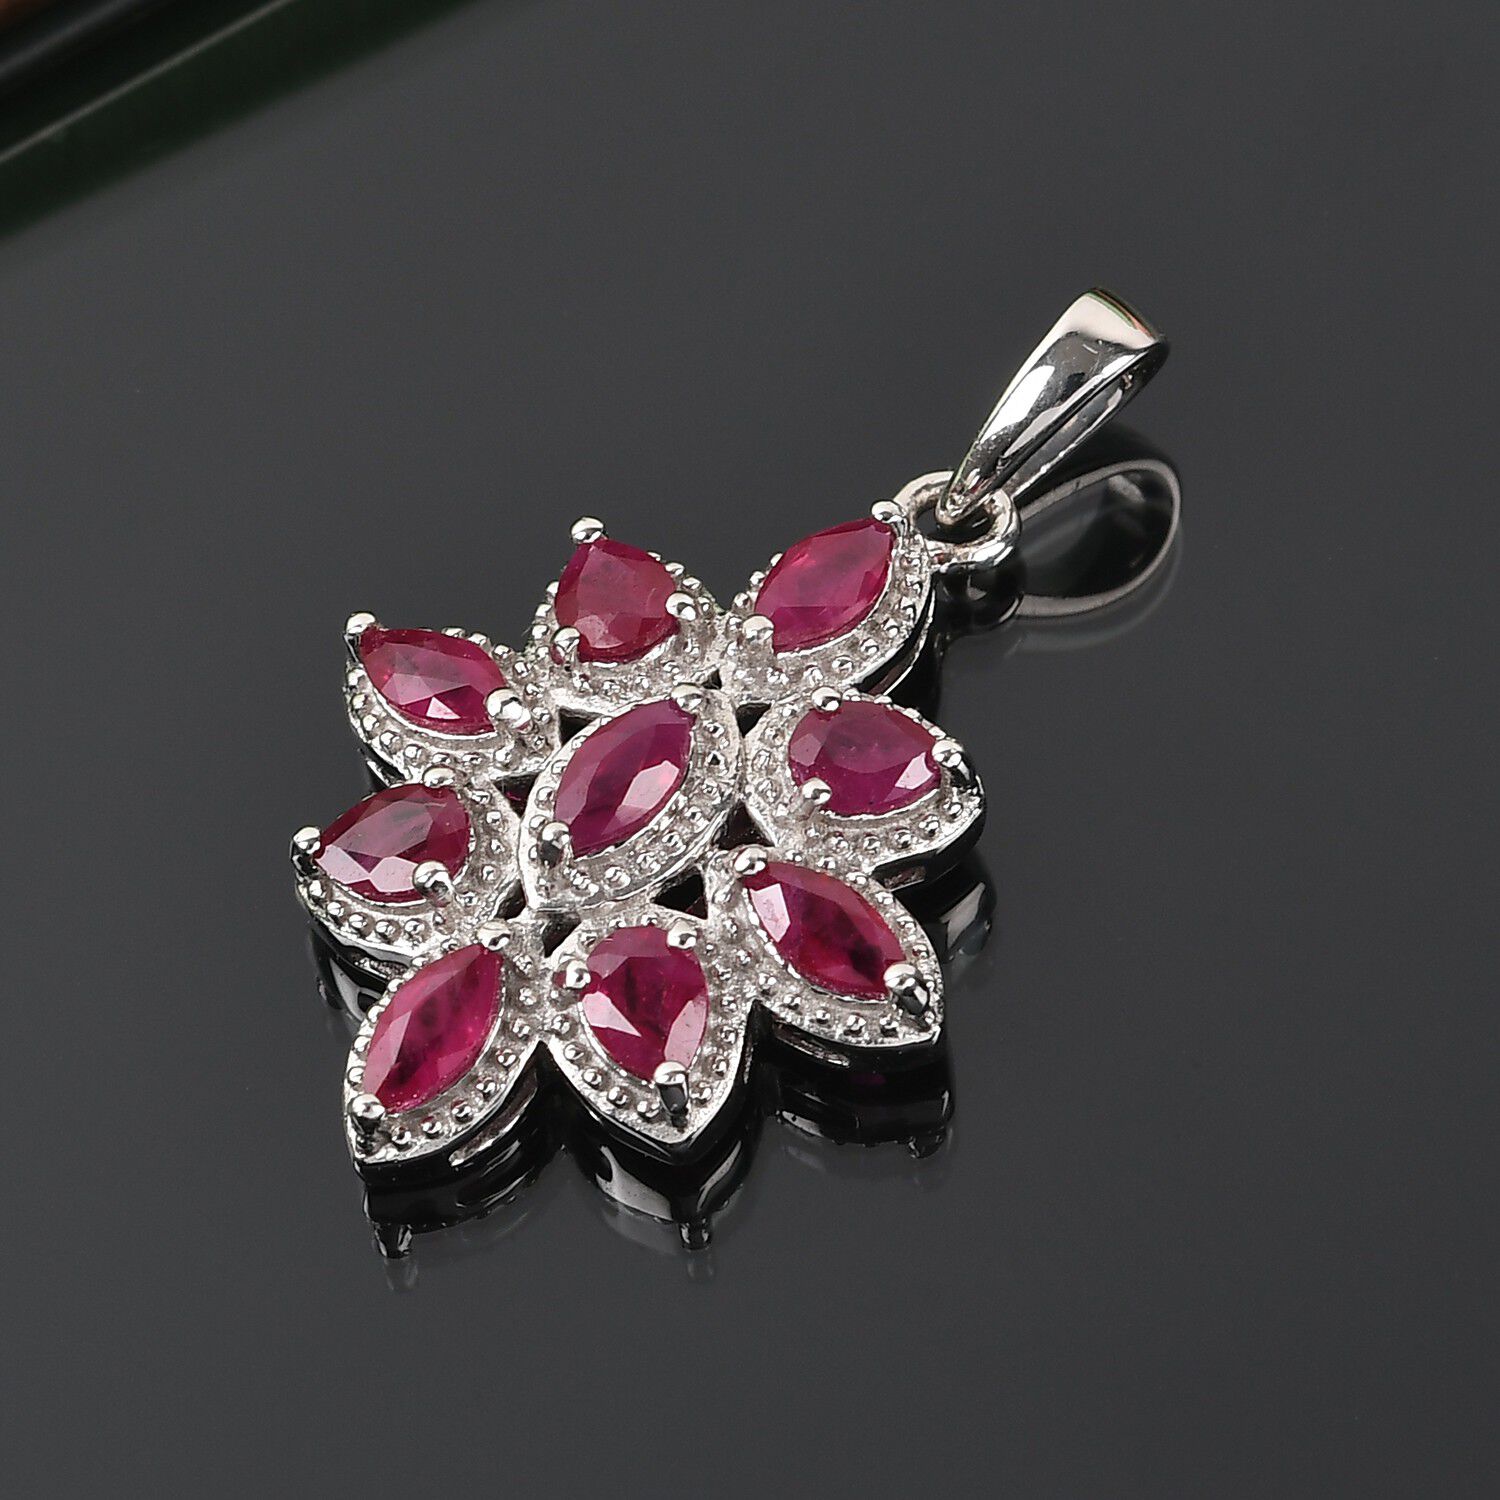 Decorative 925 Silver Overlay RED Simulated Ruby Pendant On Trend Jewellery 